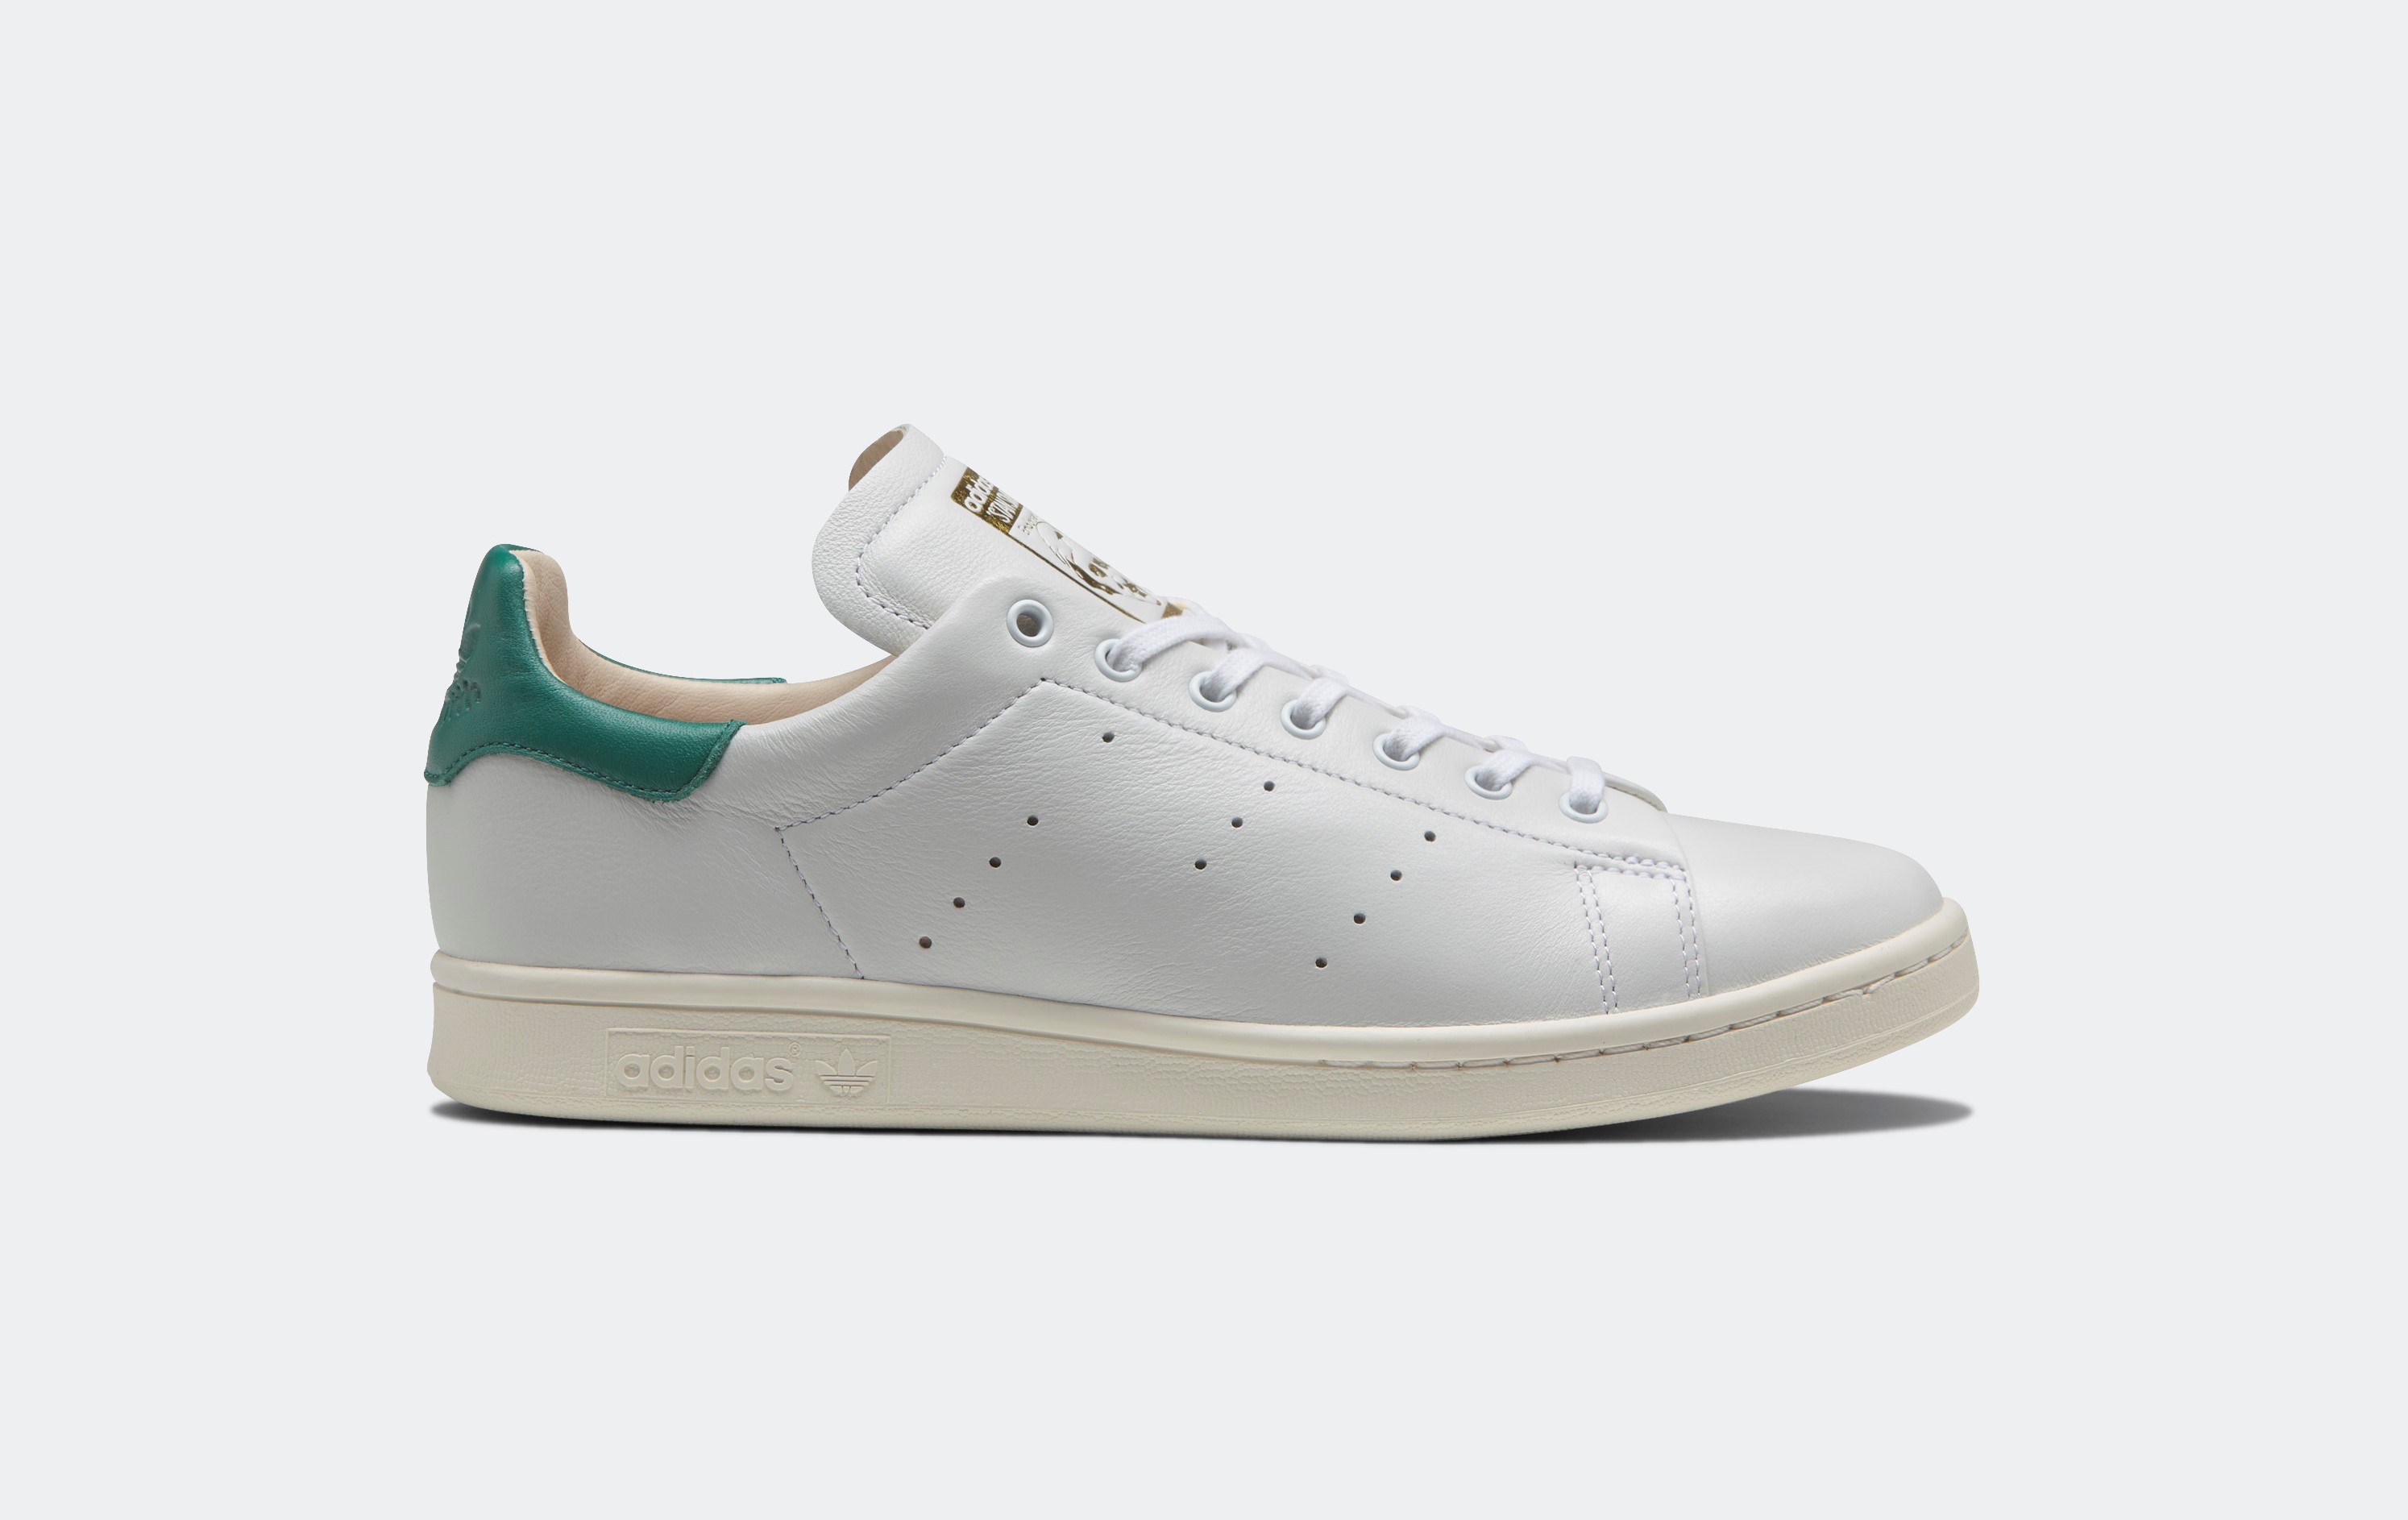 Markér kandidatgrad tidligste The Stan Smith Recon is adidas' Latest Premium Rebuild of the Classic -  WearTesters